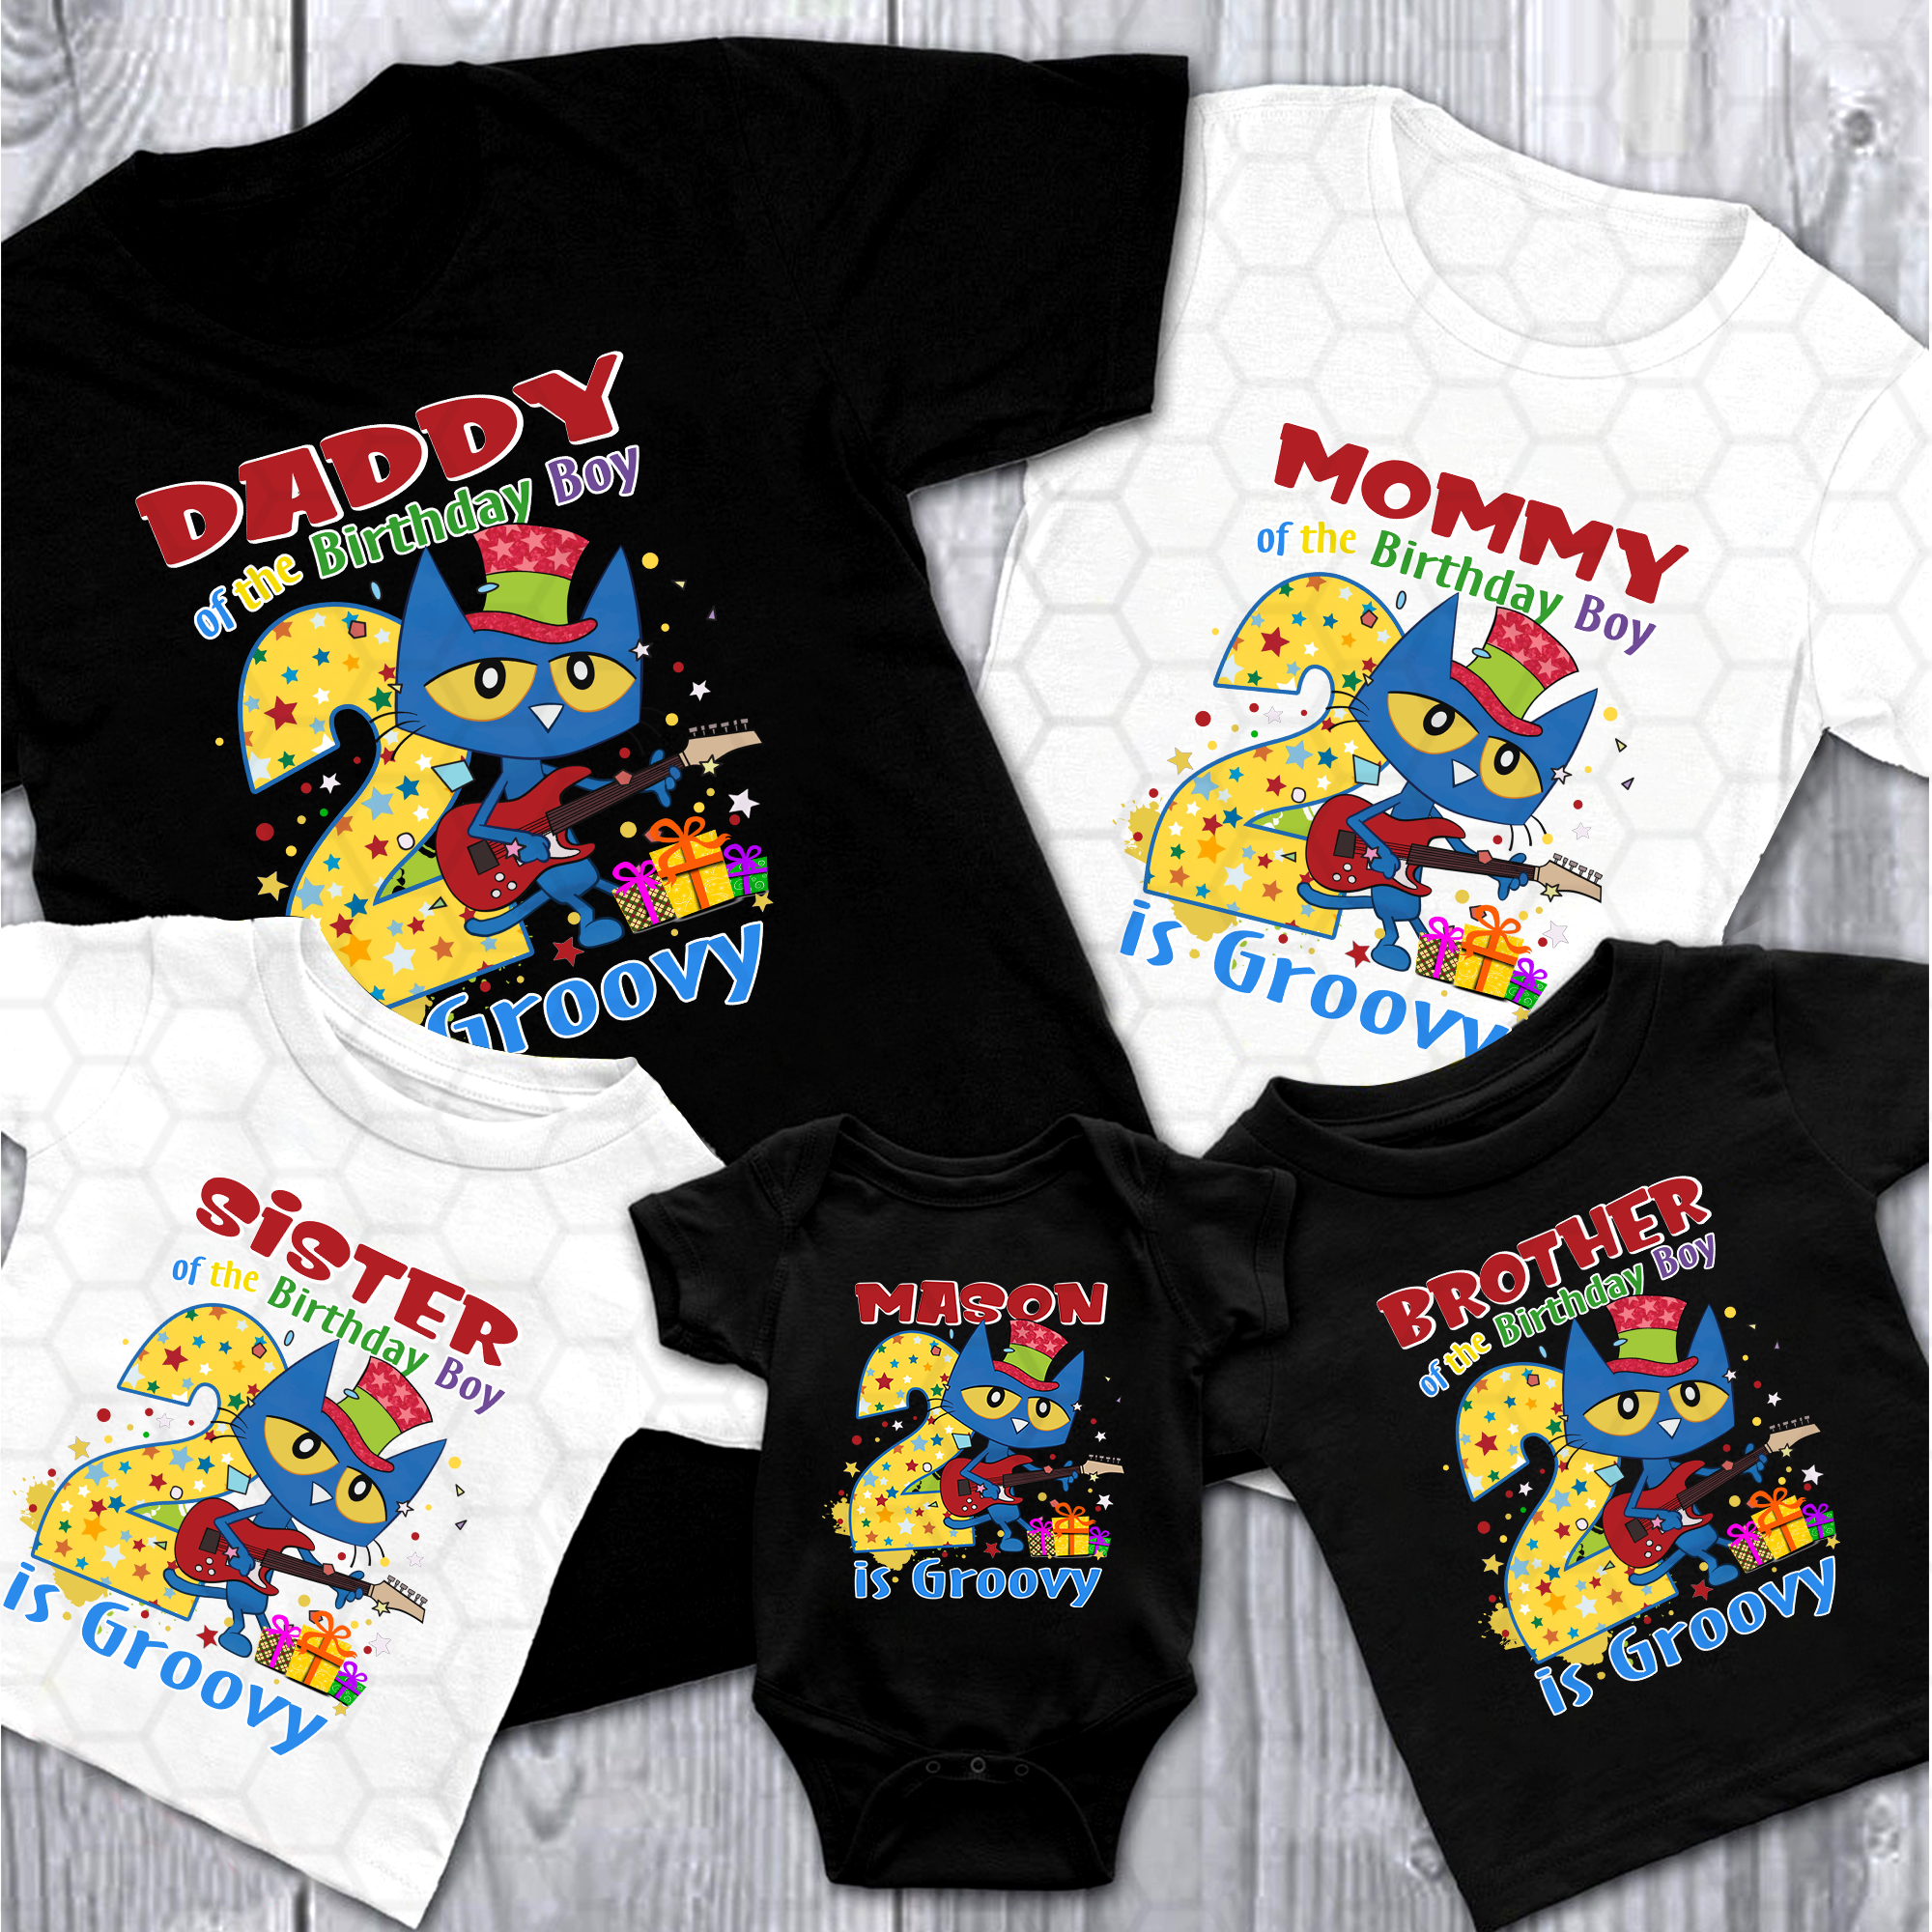 Personalized Pete The Cat Birthday Shirt, Pete The Blue Cat Inspired Shirt Groovy Birthday Shirt, Pete the Cat Birthday Party, Custom Name And AGE